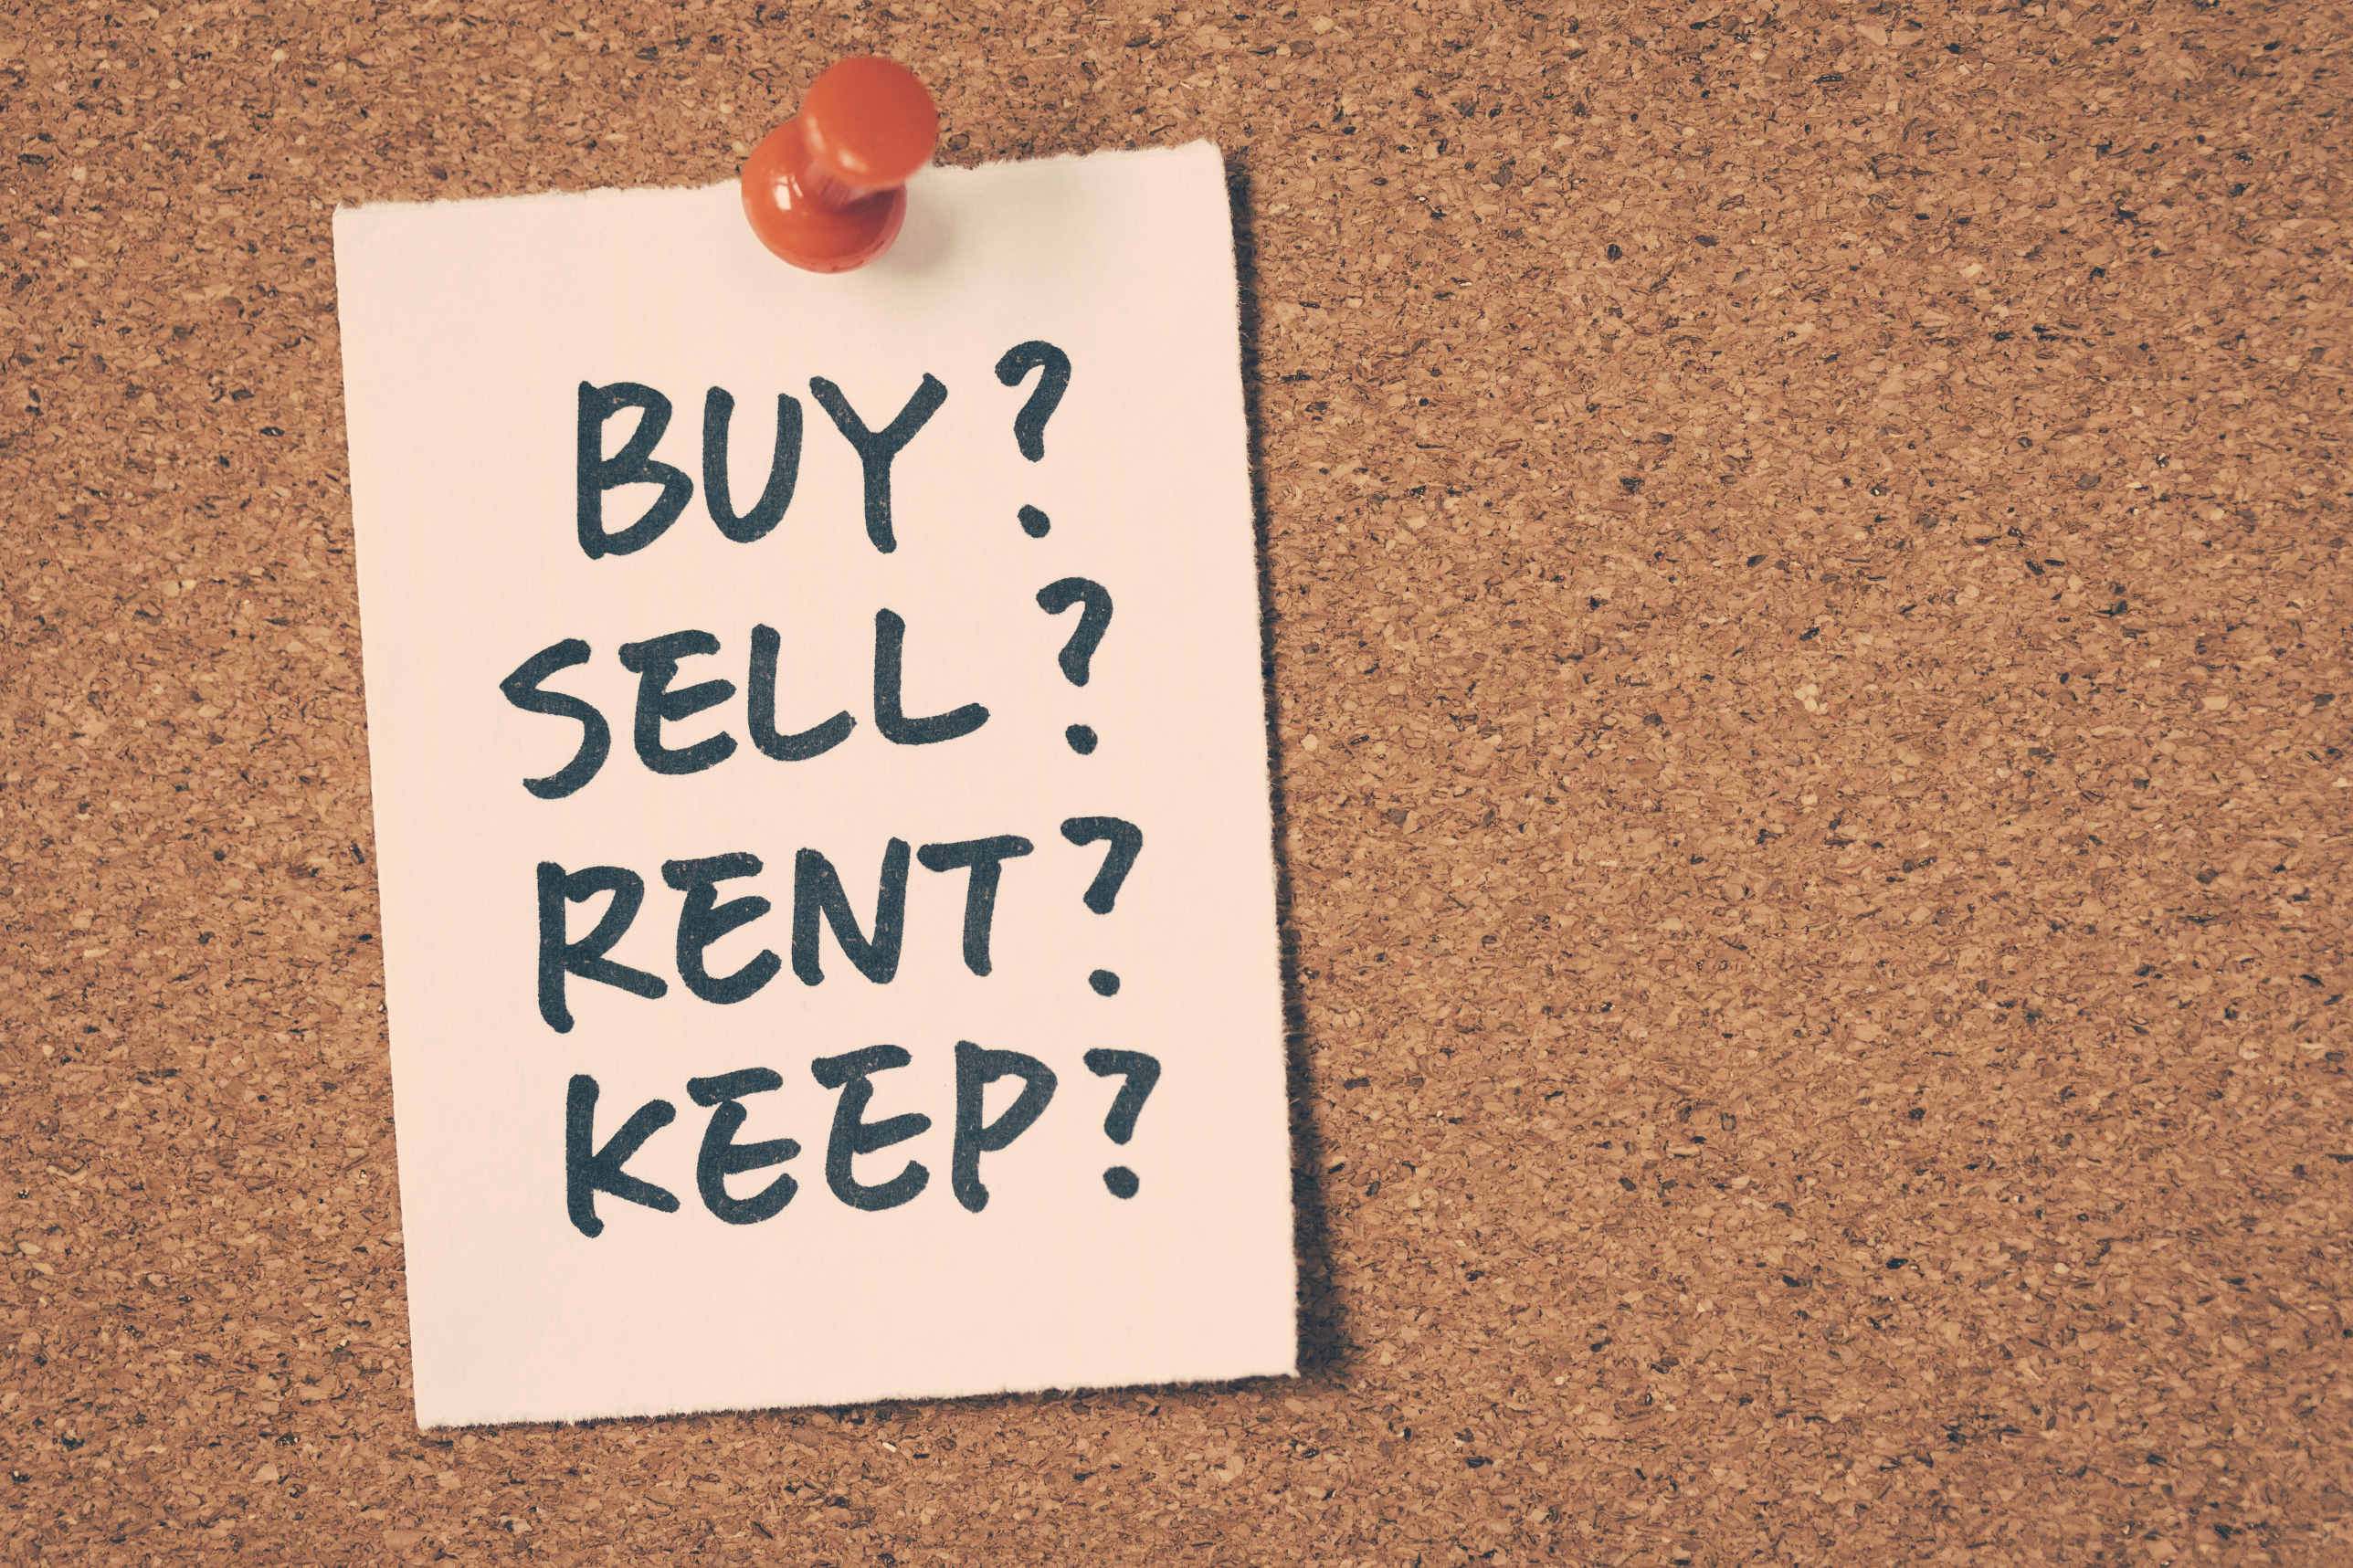 The pros and cons to selling or renting property